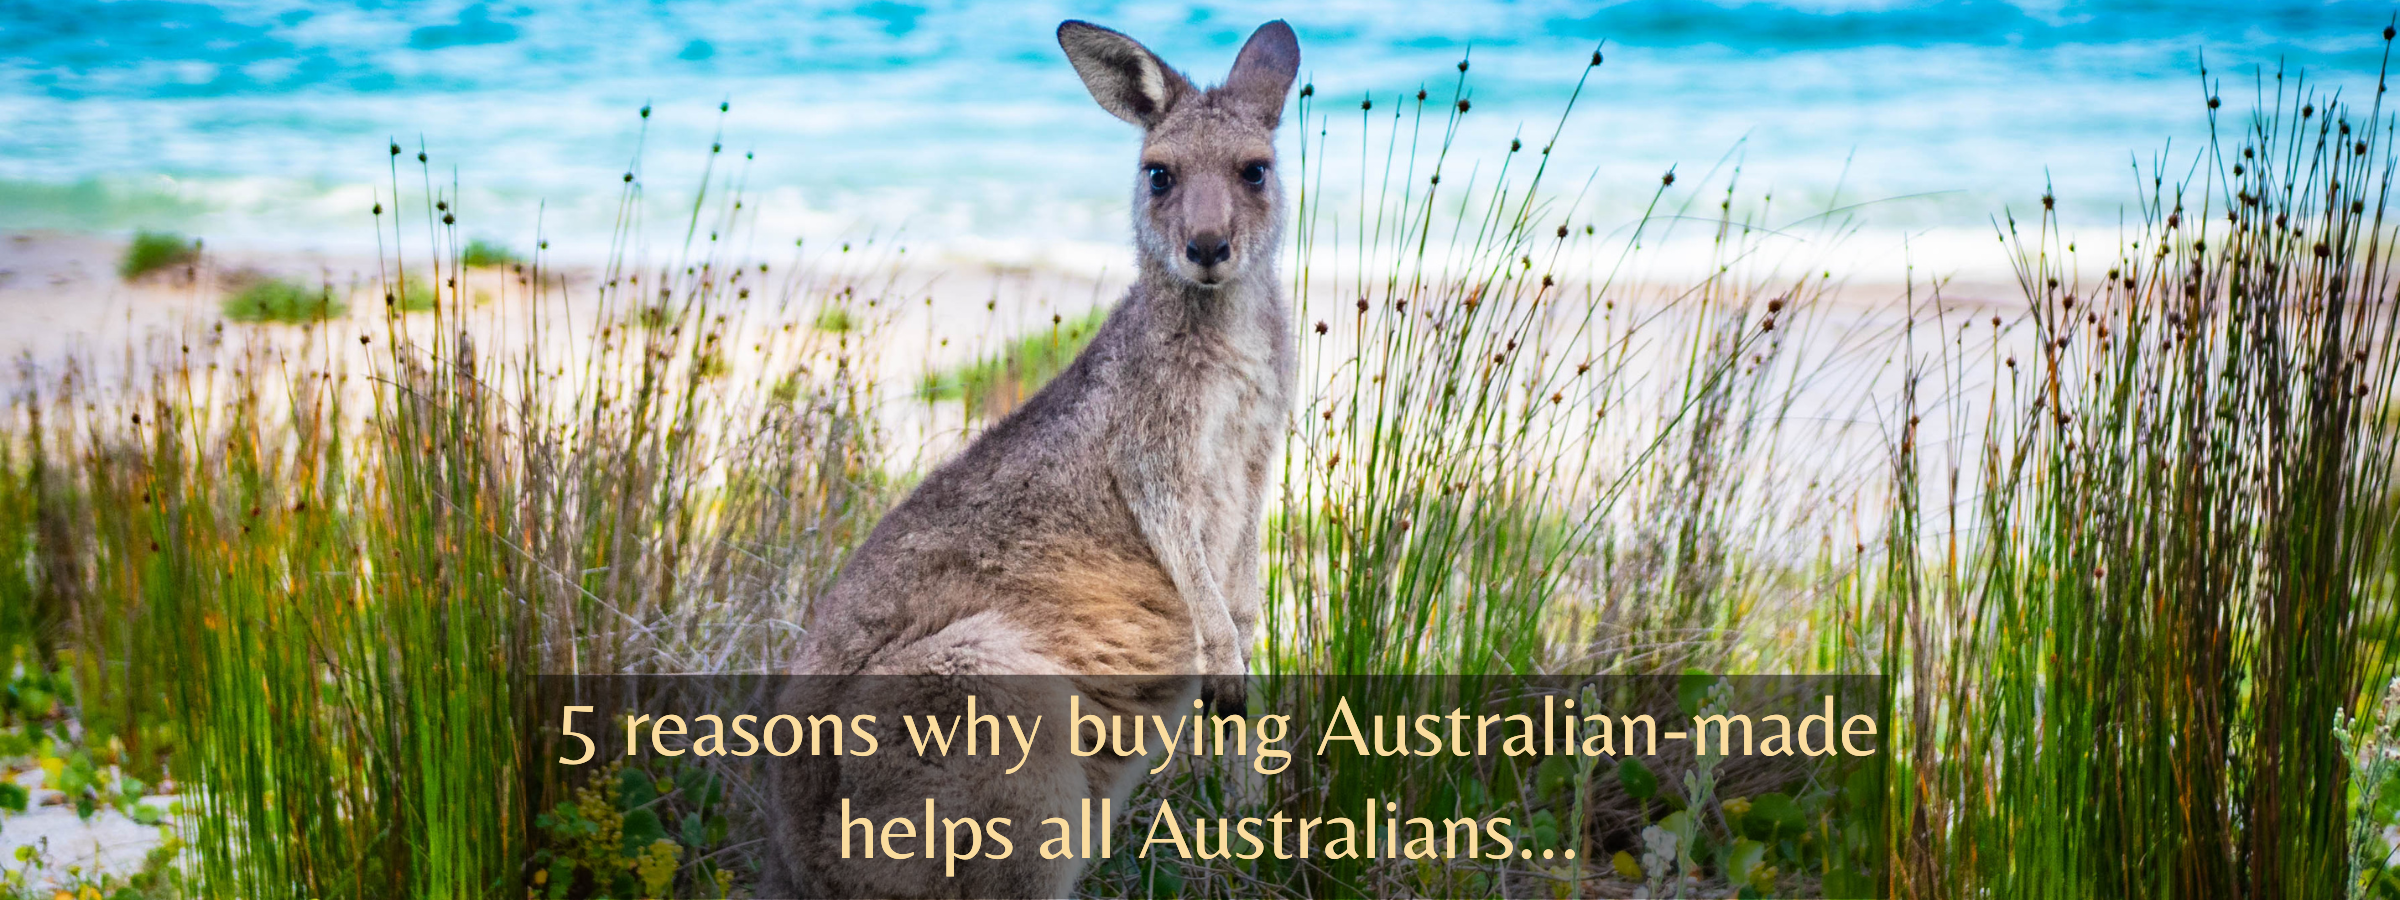 5 Important reasons to buy Australian made - how many do you know?